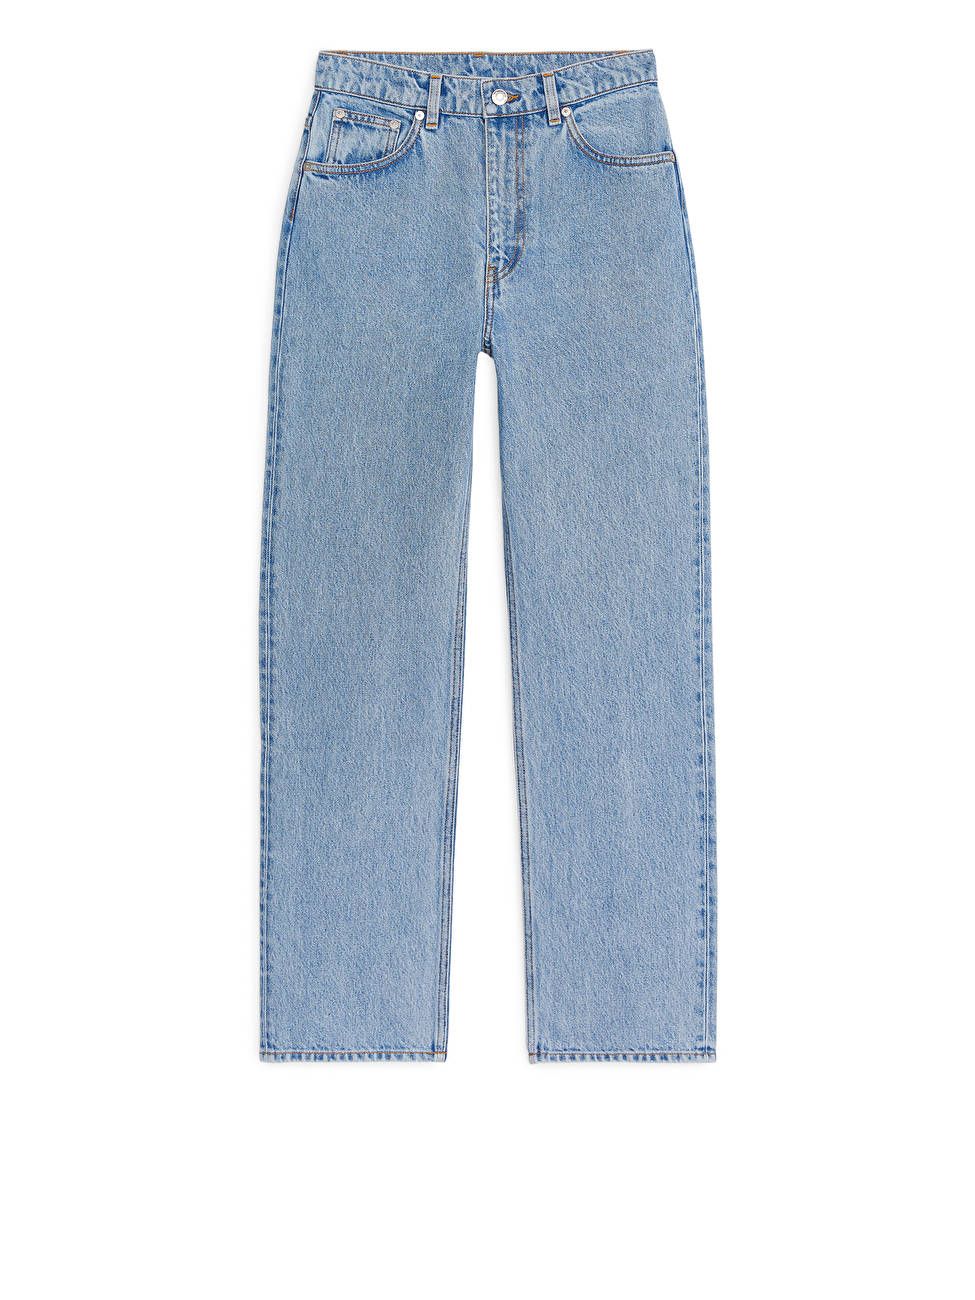 STRAIGHT CROPPED Jeans | ARKET